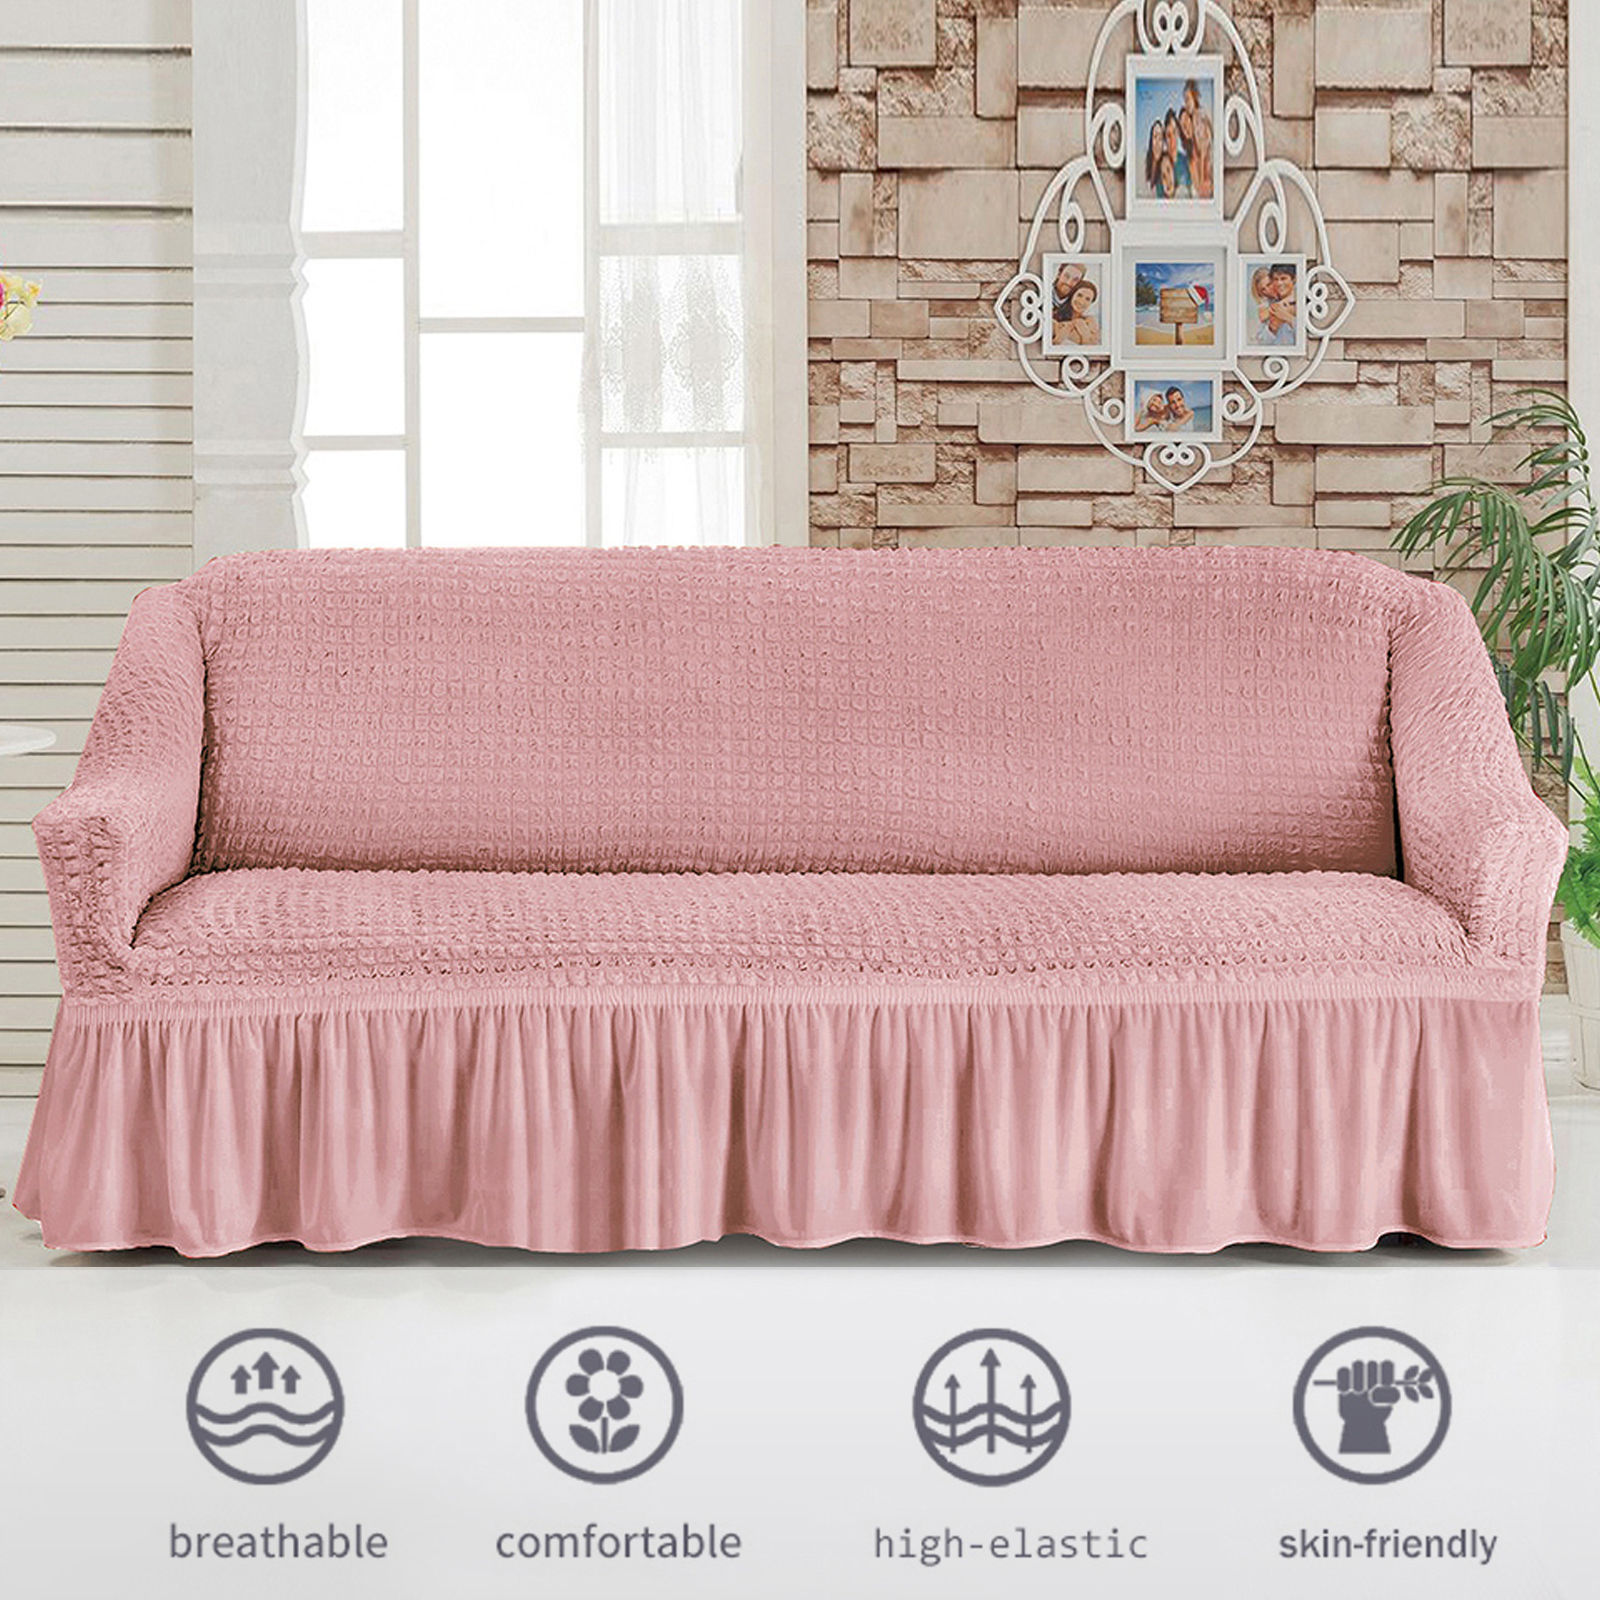 Stretch Sofa Slipcover, 3 Seater Sofa Slipcovers With Skirt With Armless Soft Sofa Cover Elastic Straps Sofa Slipcover For Living Room Kids Pets-Pink-Small